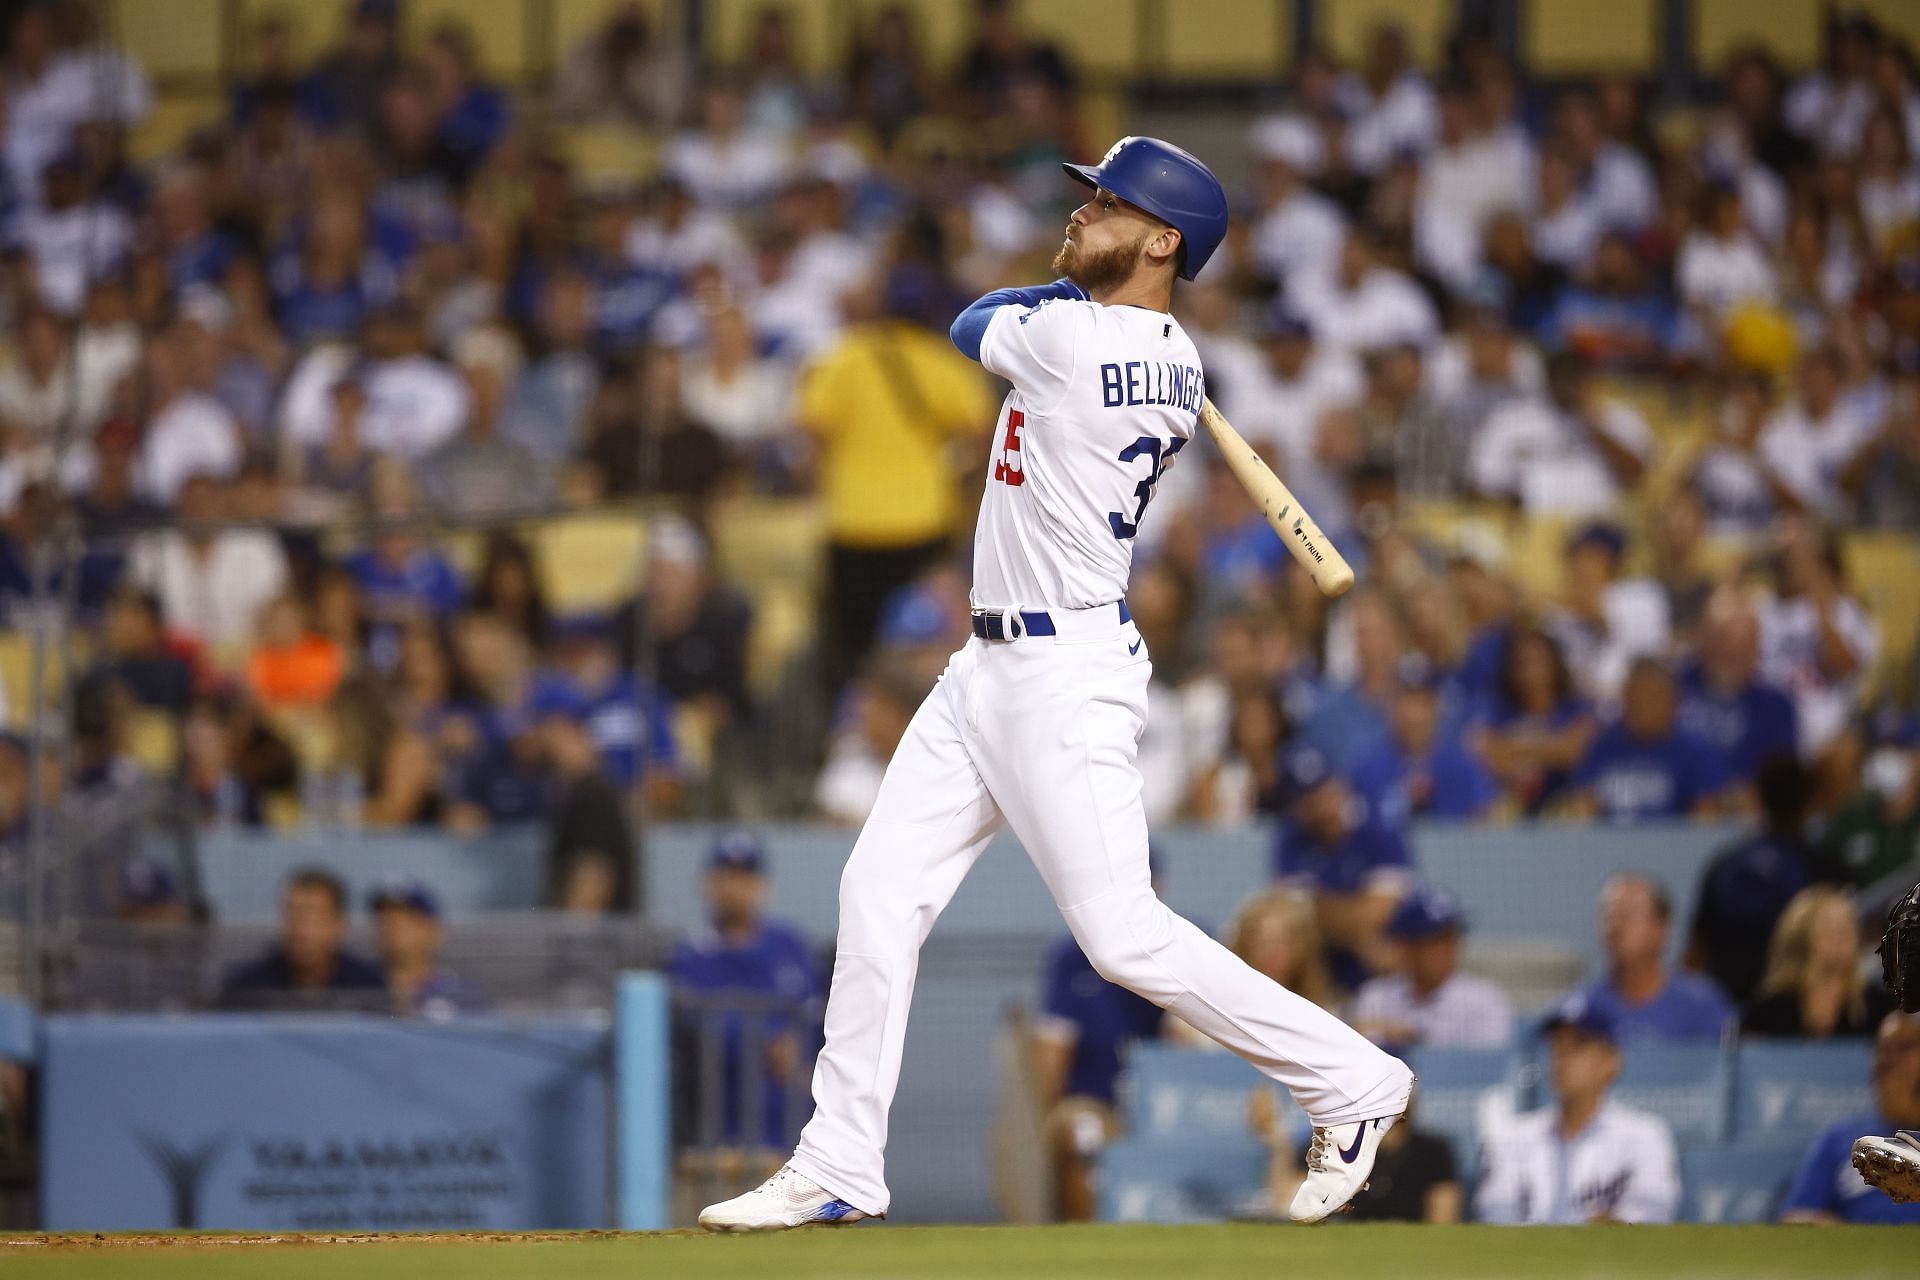 Amid a slump, manager Dave Roberts is giving Cody Bellinger a few games off.